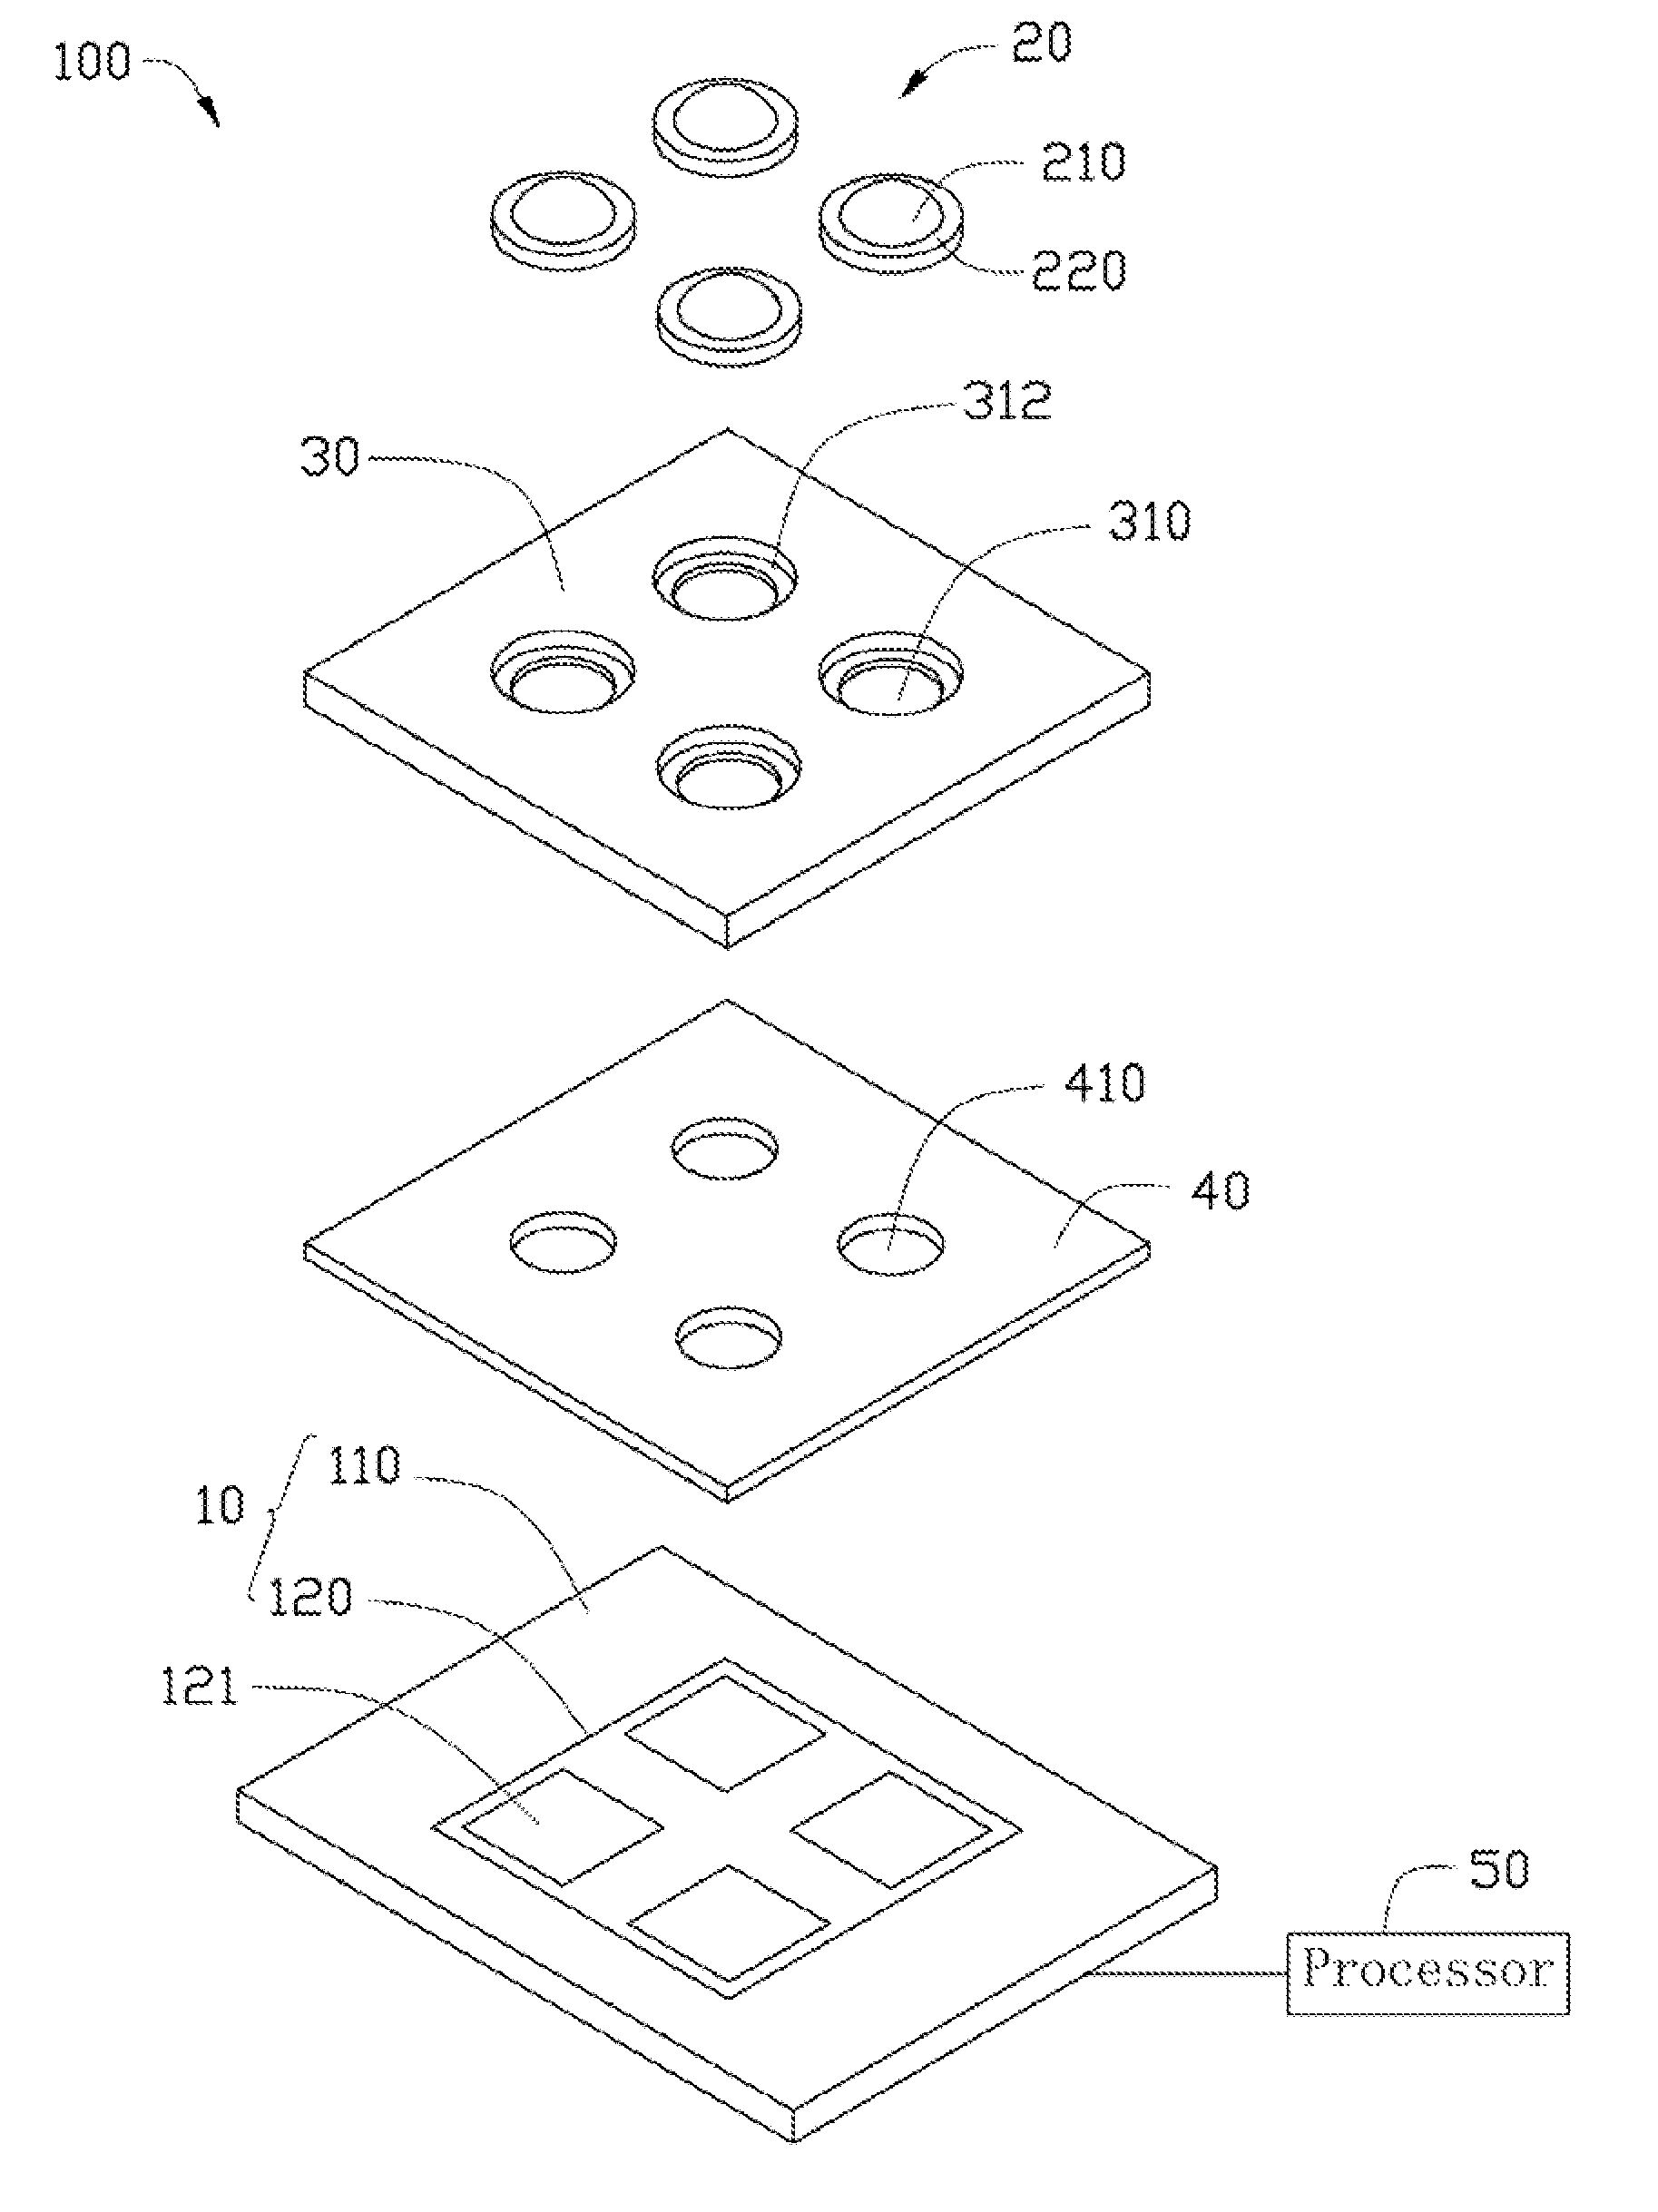 Camera module with lens array